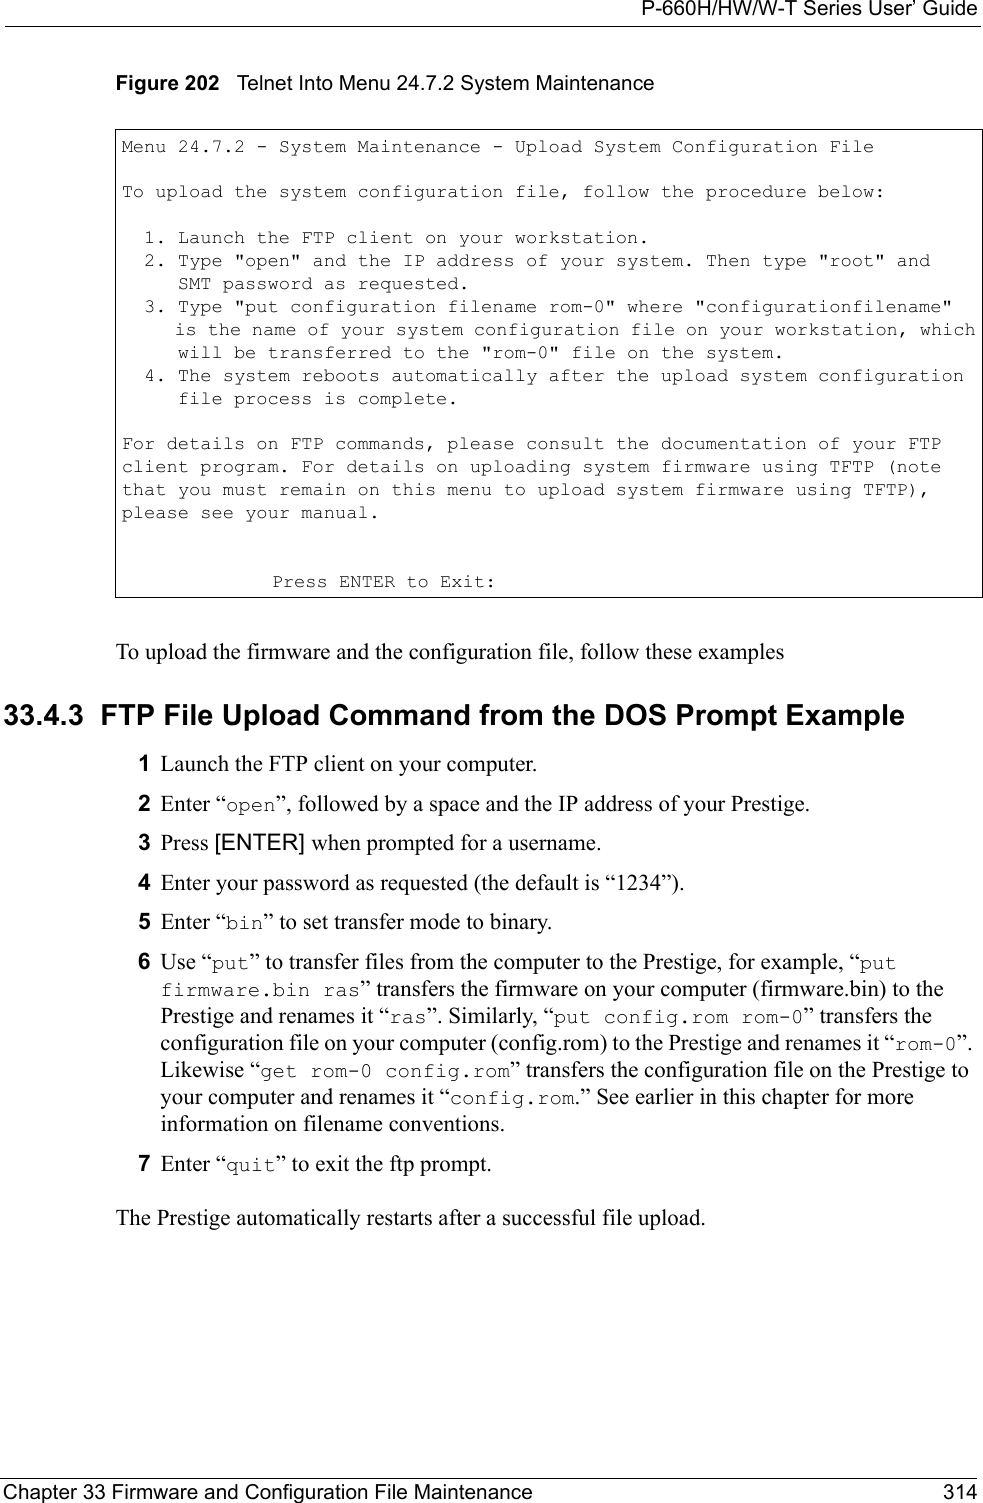 P-660H/HW/W-T Series User’ GuideChapter 33 Firmware and Configuration File Maintenance 314Figure 202   Telnet Into Menu 24.7.2 System Maintenance To upload the firmware and the configuration file, follow these examples33.4.3  FTP File Upload Command from the DOS Prompt Example1Launch the FTP client on your computer.2Enter “open”, followed by a space and the IP address of your Prestige. 3Press [ENTER] when prompted for a username.4Enter your password as requested (the default is “1234”).5Enter “bin” to set transfer mode to binary.6Use “put” to transfer files from the computer to the Prestige, for example, “put firmware.bin ras” transfers the firmware on your computer (firmware.bin) to the Prestige and renames it “ras”. Similarly, “put config.rom rom-0” transfers the configuration file on your computer (config.rom) to the Prestige and renames it “rom-0”. Likewise “get rom-0 config.rom” transfers the configuration file on the Prestige to your computer and renames it “config.rom.” See earlier in this chapter for more information on filename conventions.7Enter “quit” to exit the ftp prompt.The Prestige automatically restarts after a successful file upload.Menu 24.7.2 - System Maintenance - Upload System Configuration FileTo upload the system configuration file, follow the procedure below:  1. Launch the FTP client on your workstation.  2. Type &quot;open&quot; and the IP address of your system. Then type &quot;root&quot; and     SMT password as requested.  3. Type &quot;put configuration filename rom-0&quot; where &quot;configurationfilename&quot;     is the name of your system configuration file on your workstation, which     will be transferred to the &quot;rom-0&quot; file on the system.  4. The system reboots automatically after the upload system configuration     file process is complete.For details on FTP commands, please consult the documentation of your FTPclient program. For details on uploading system firmware using TFTP (notethat you must remain on this menu to upload system firmware using TFTP),please see your manual.Press ENTER to Exit: